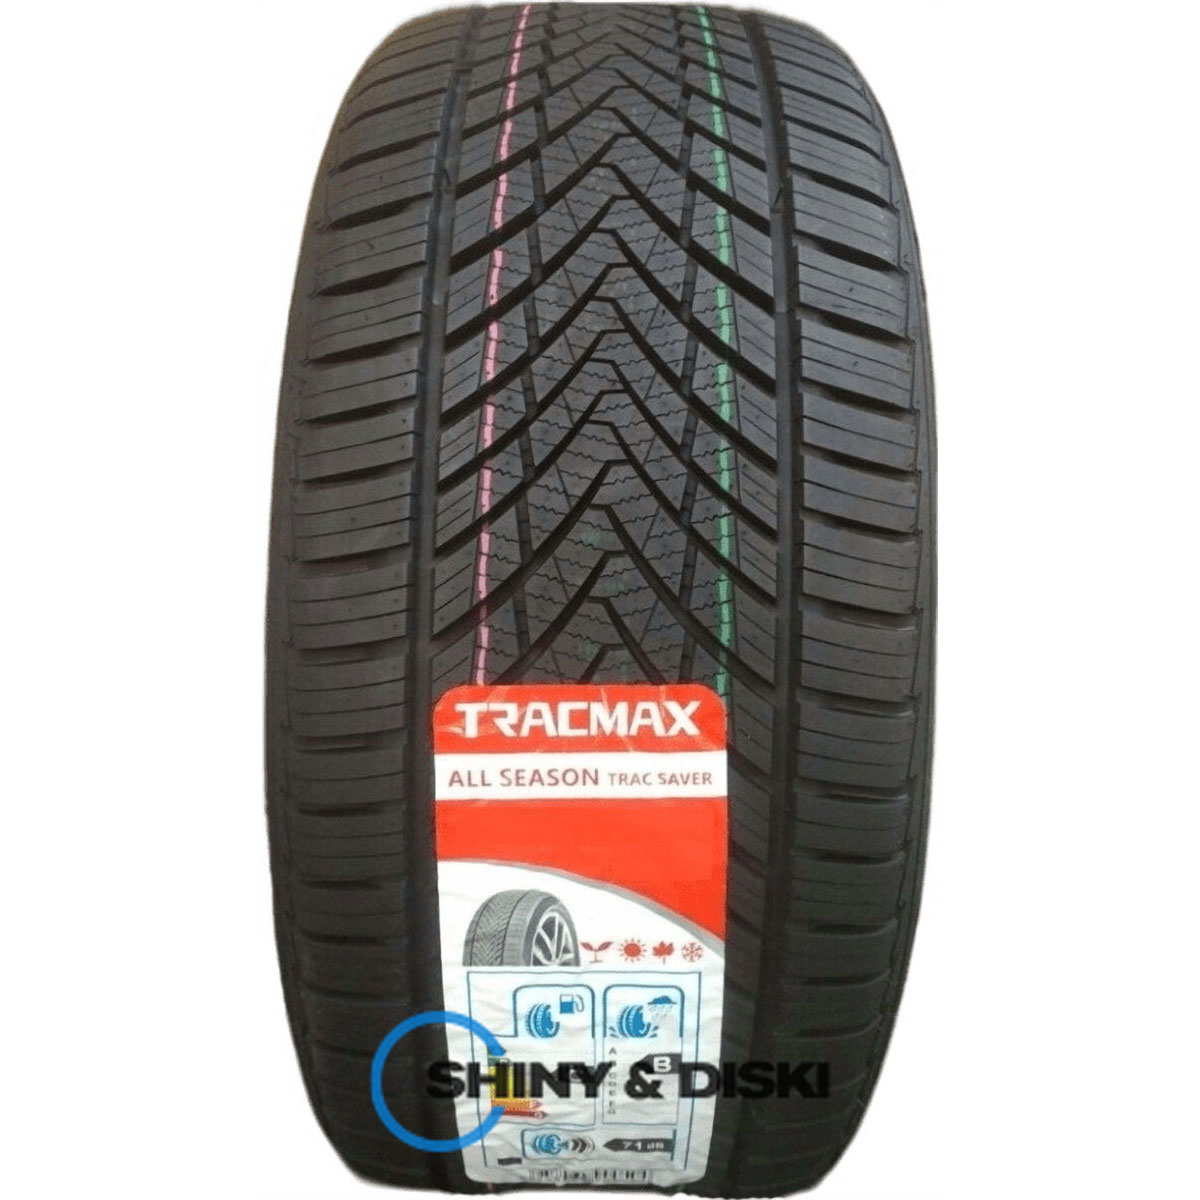 покрышки tracmax a/s trac saver 185/60 r15 84h